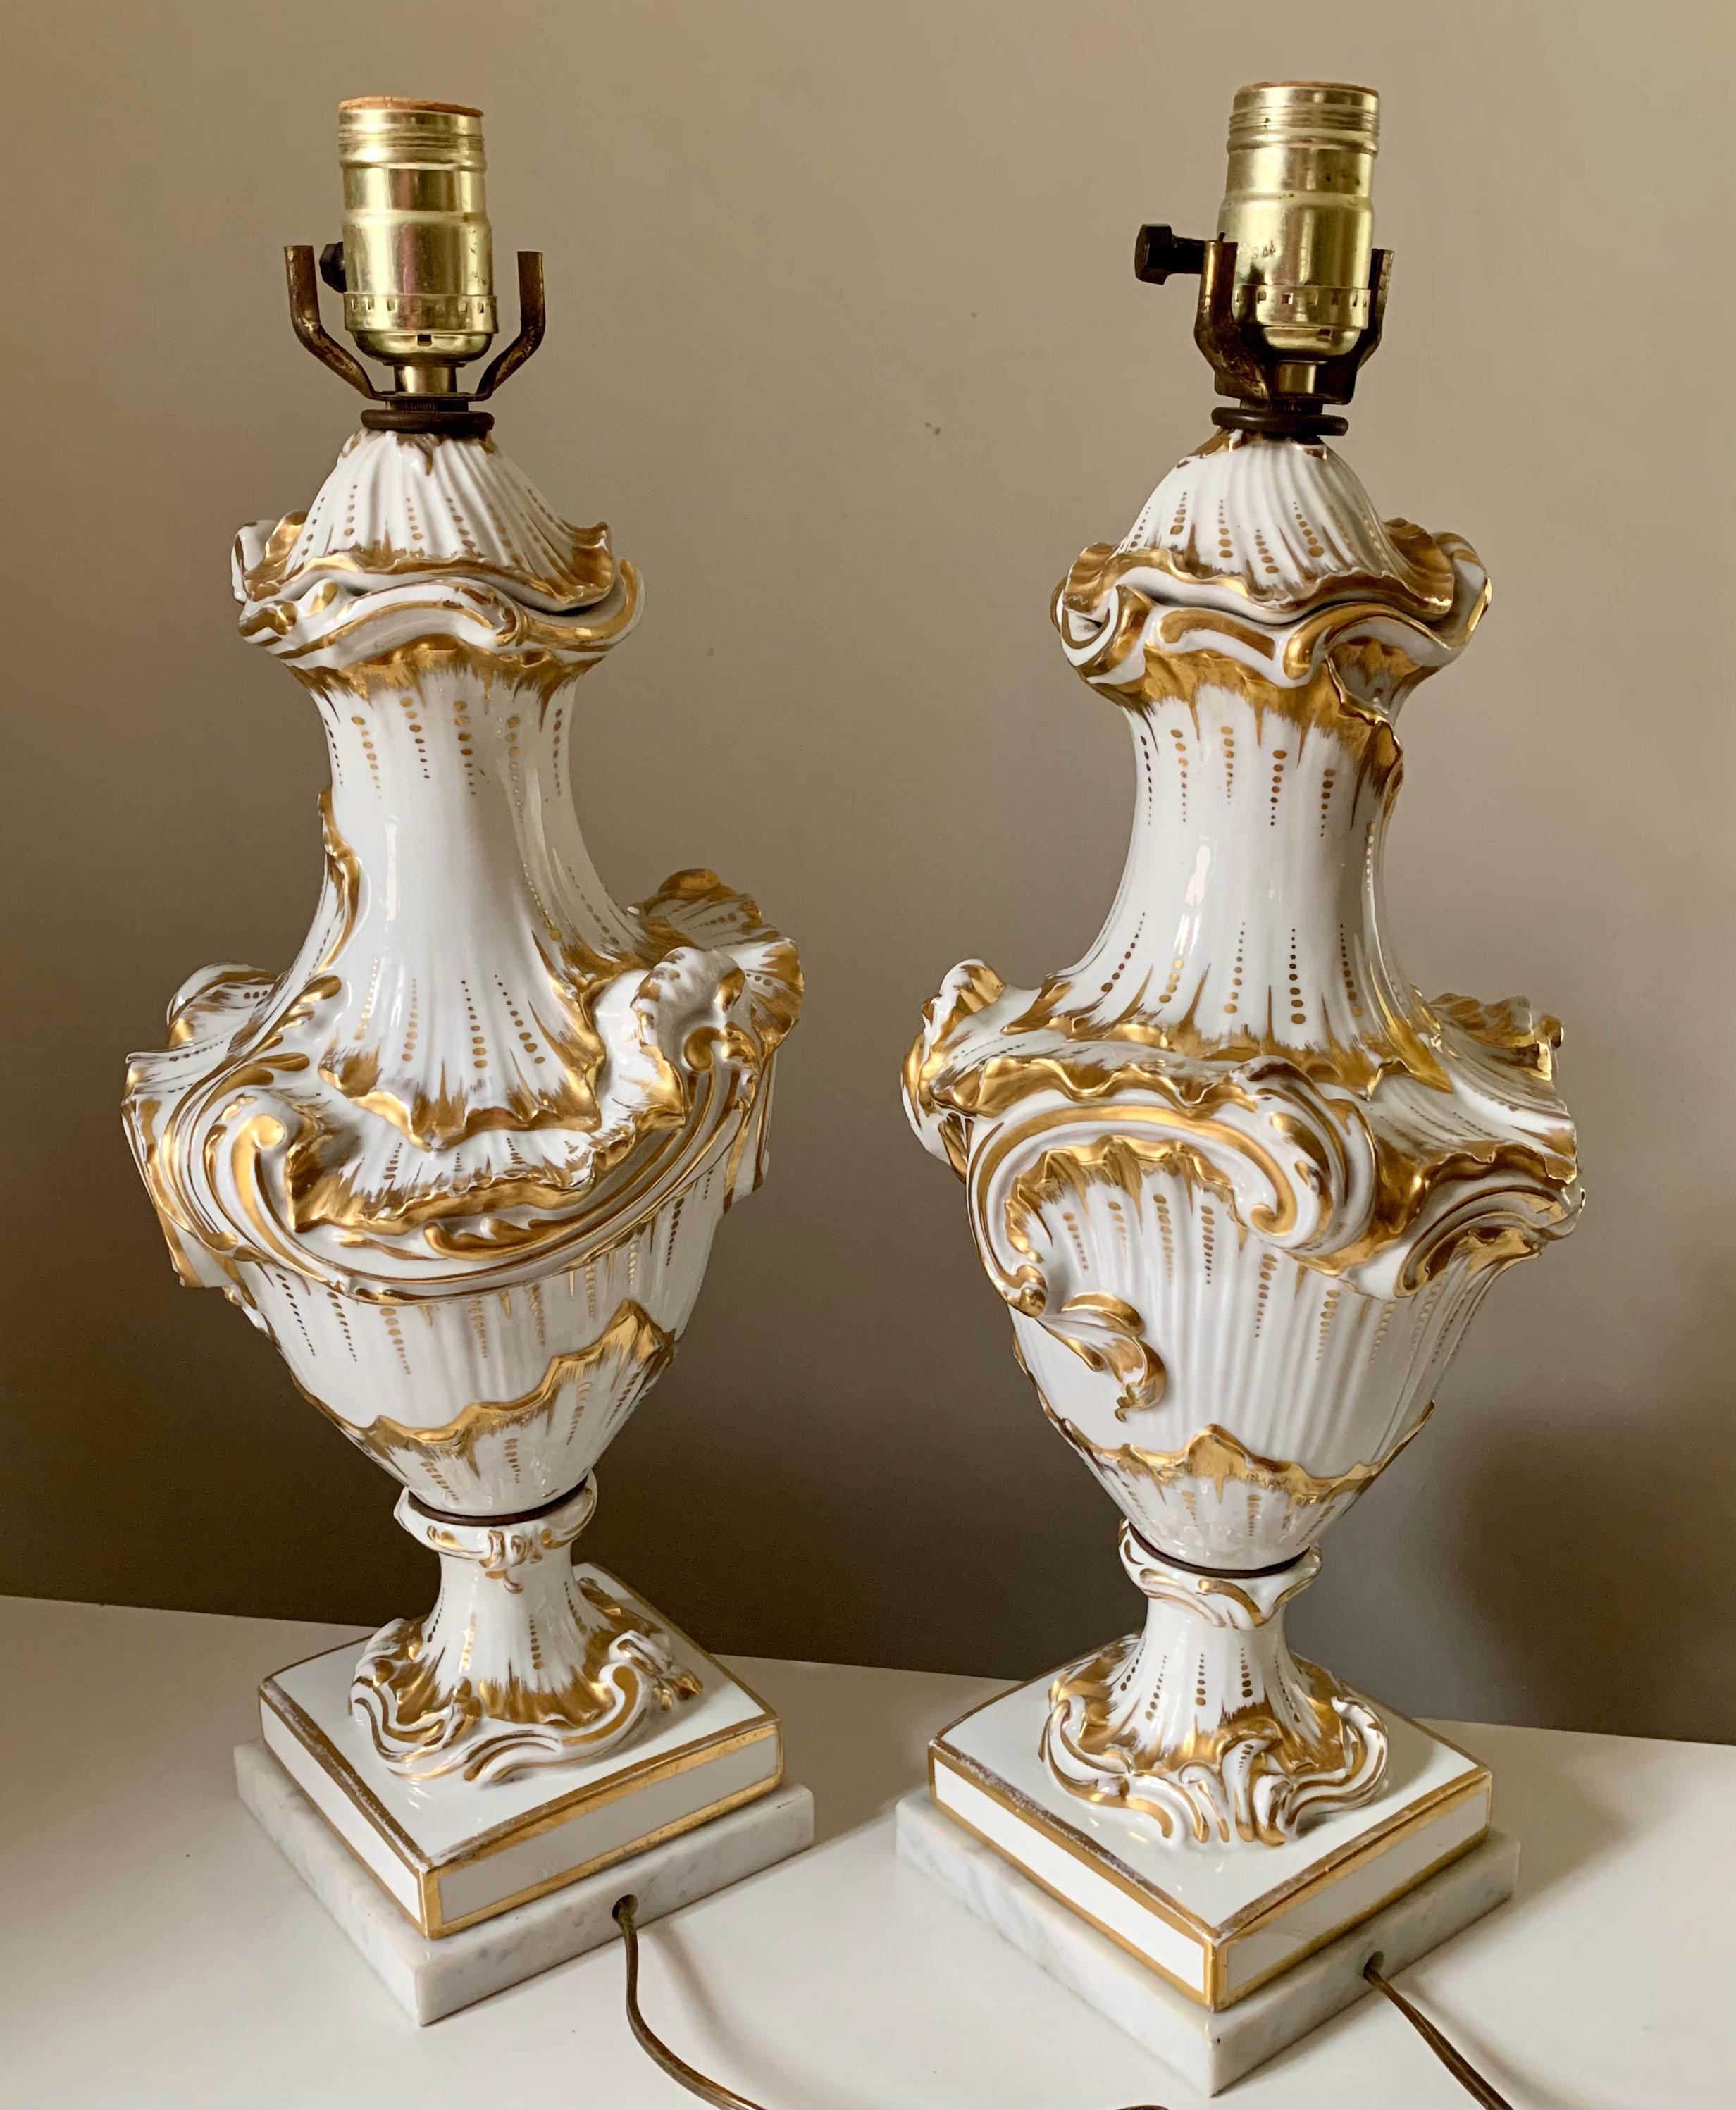 Fine Pair Rococo Style White and Gold Porcelain Table Lamps, 19th Century For Sale 2